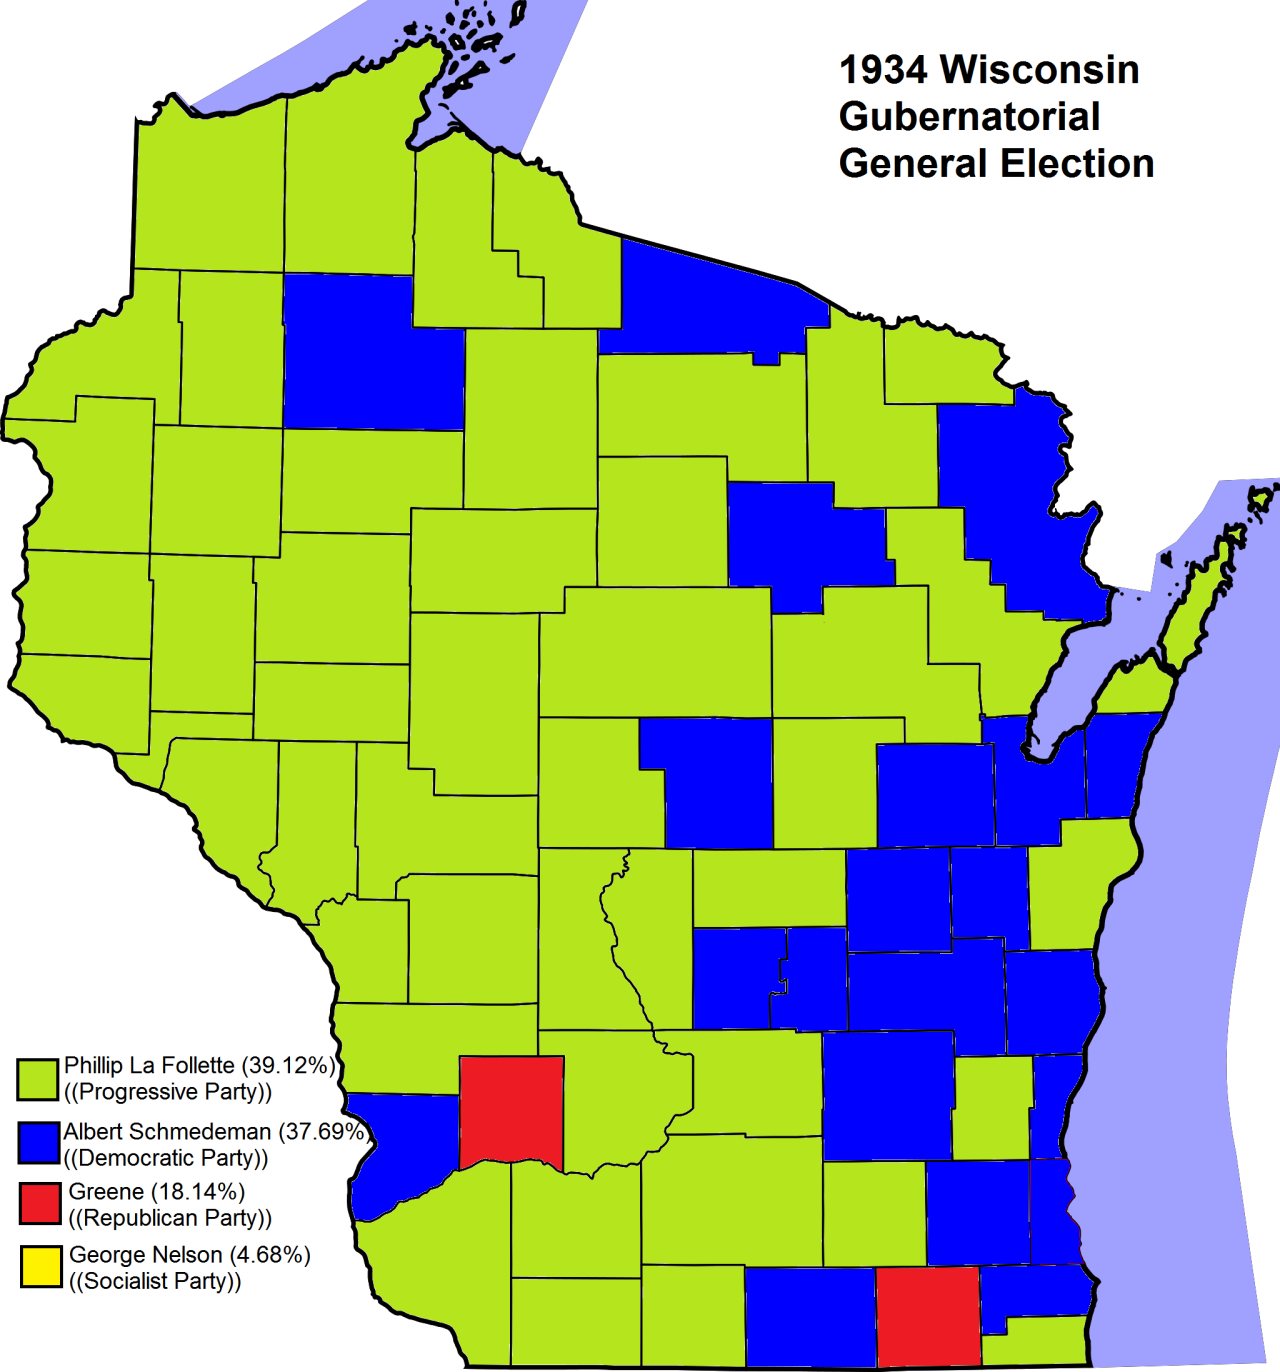 1934 Wisconsin Gubernatorial General Election
After losing in the 1932 Republican Primary, Phillip and Robert La Follete split off to form the Wisconsin Progressive Party, an established wing of the Republican party active in other states at that...